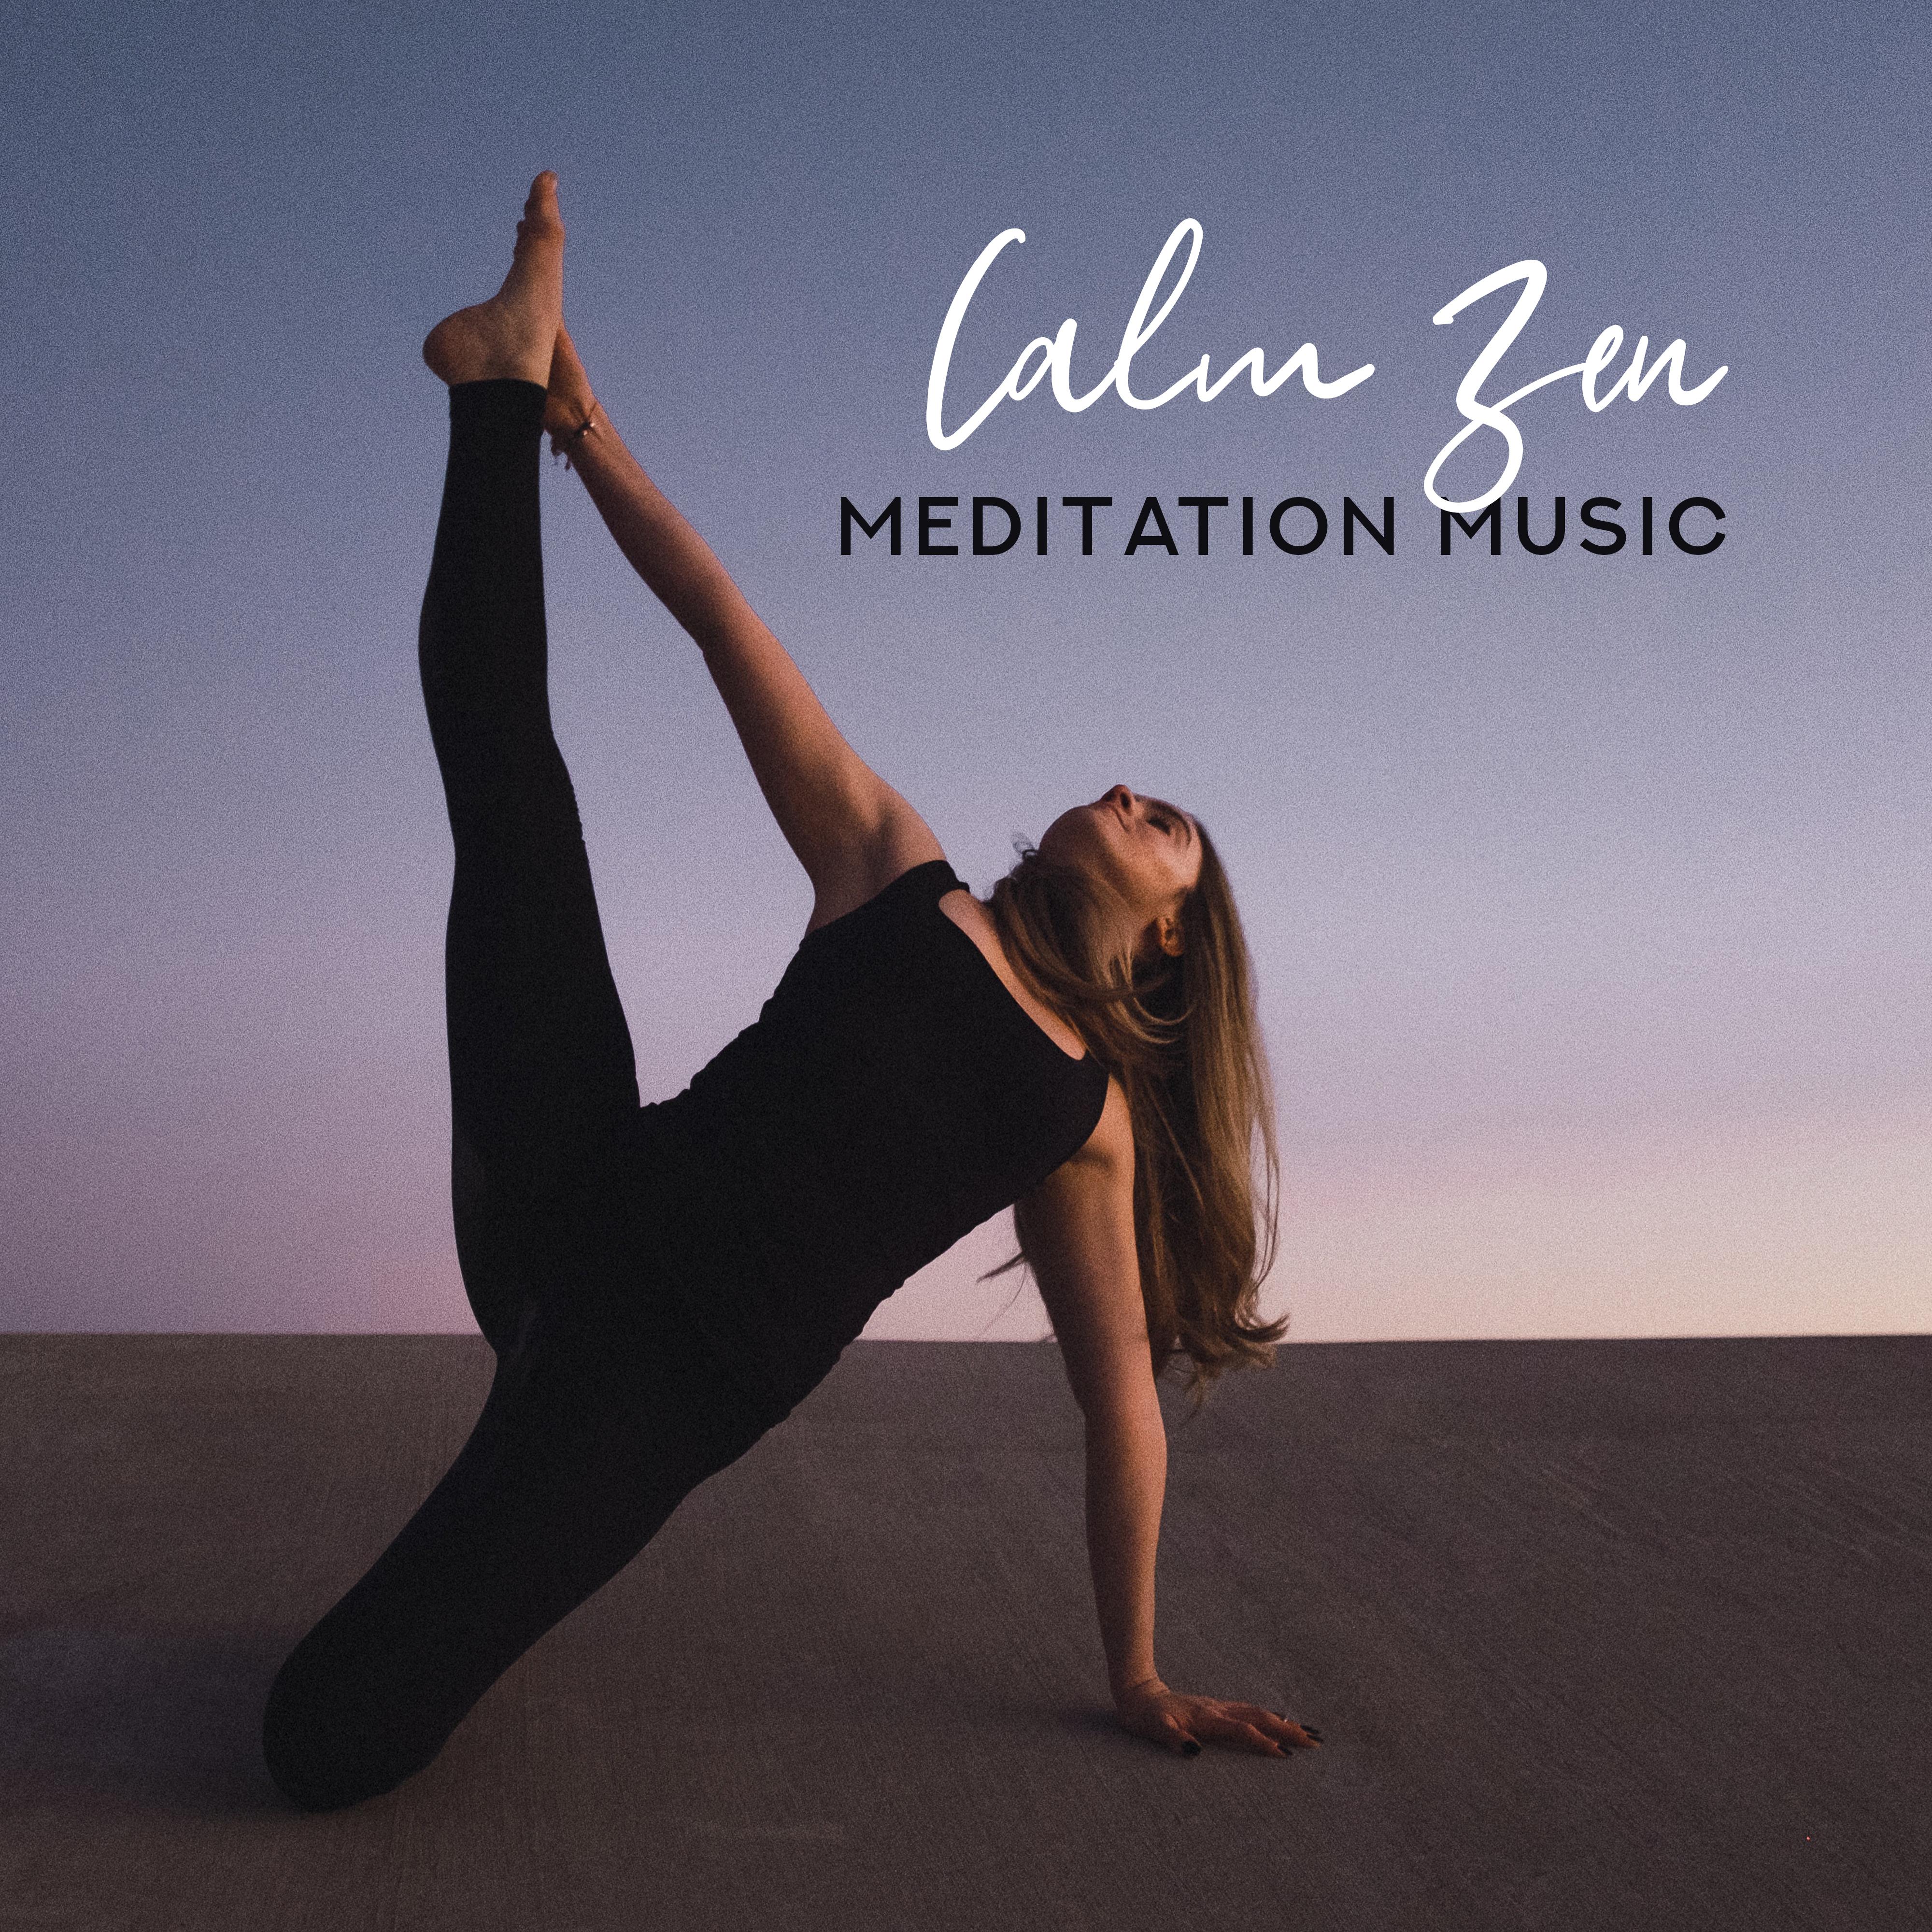 Calm Zen Meditation Music - An Essential Set for Meditation and Yoga Exercises, Zen Practice, Achieving Inner Harmony and Balance